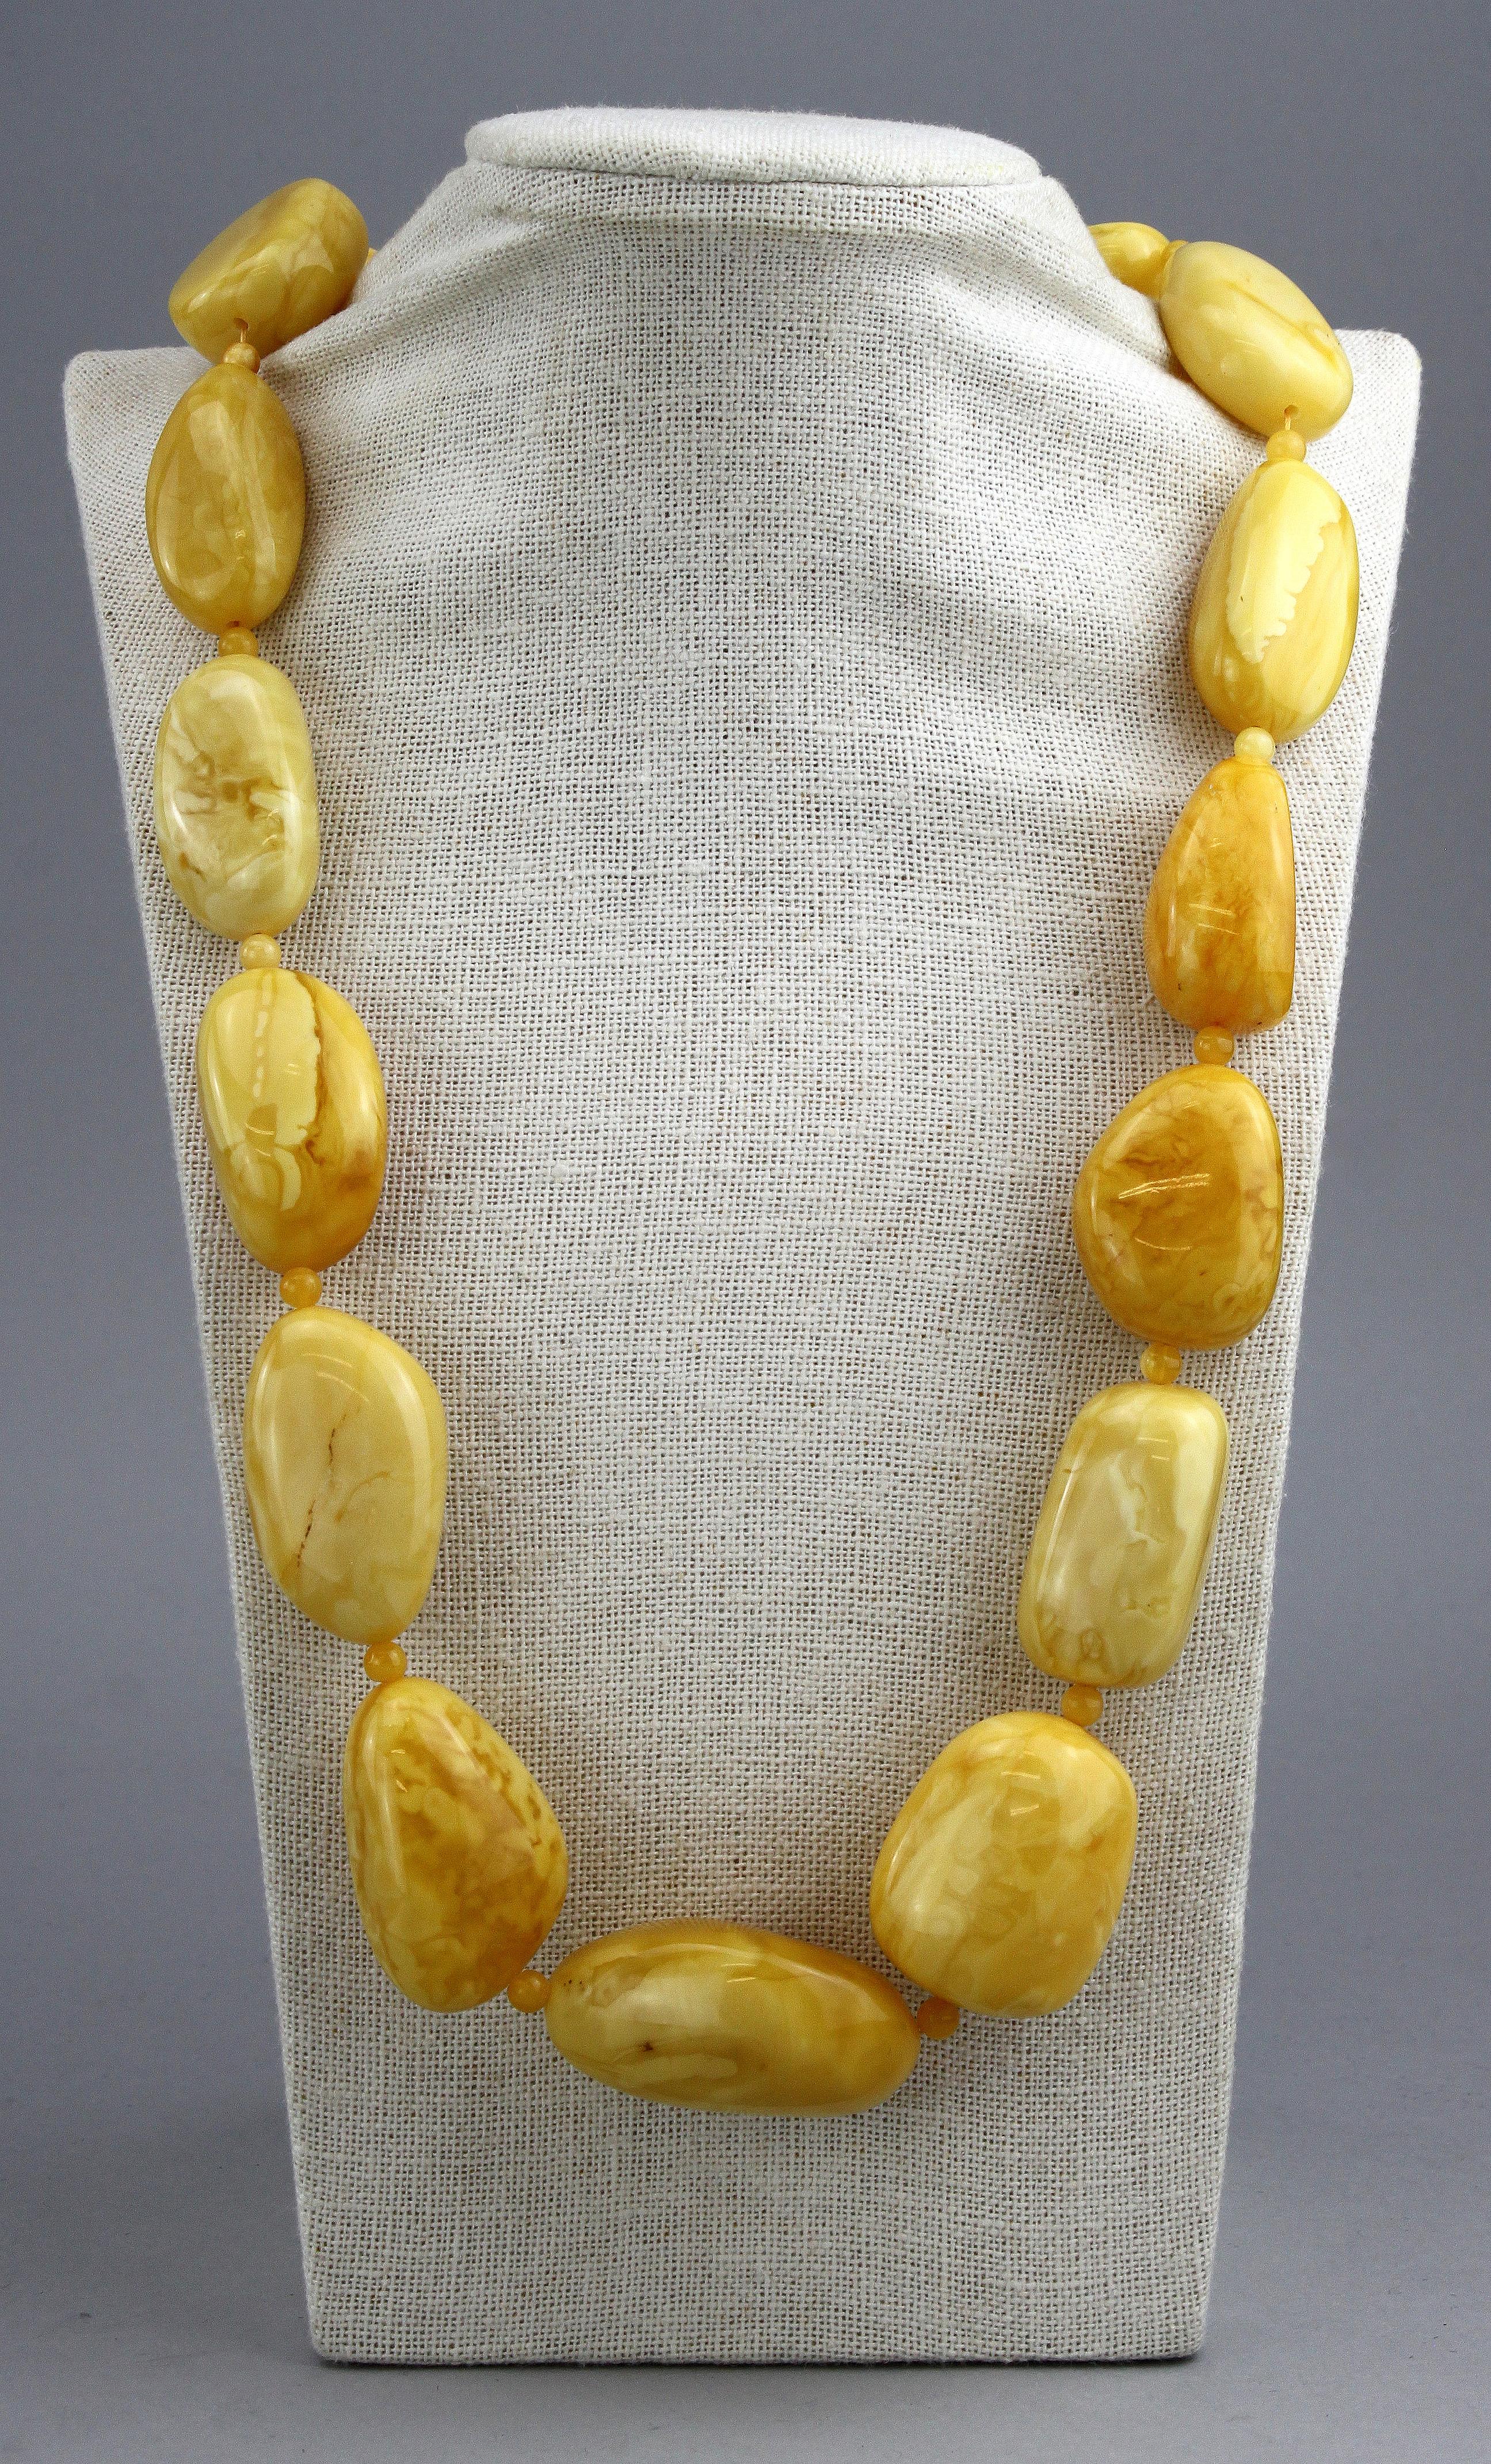 Natural Baltic white amber necklace.
Circa 1950's

Dimensions -
Length : 82  cm
Width : 3 cm
Weight : 160 grams

Amber - 
Treatment : Natural
Large Amber Stone Size : 4.5 x 2.8 x 2.1 cm
Medium Stone Size : 4 x 2.5 x 1.5 cm

Condition: Pre-owned,